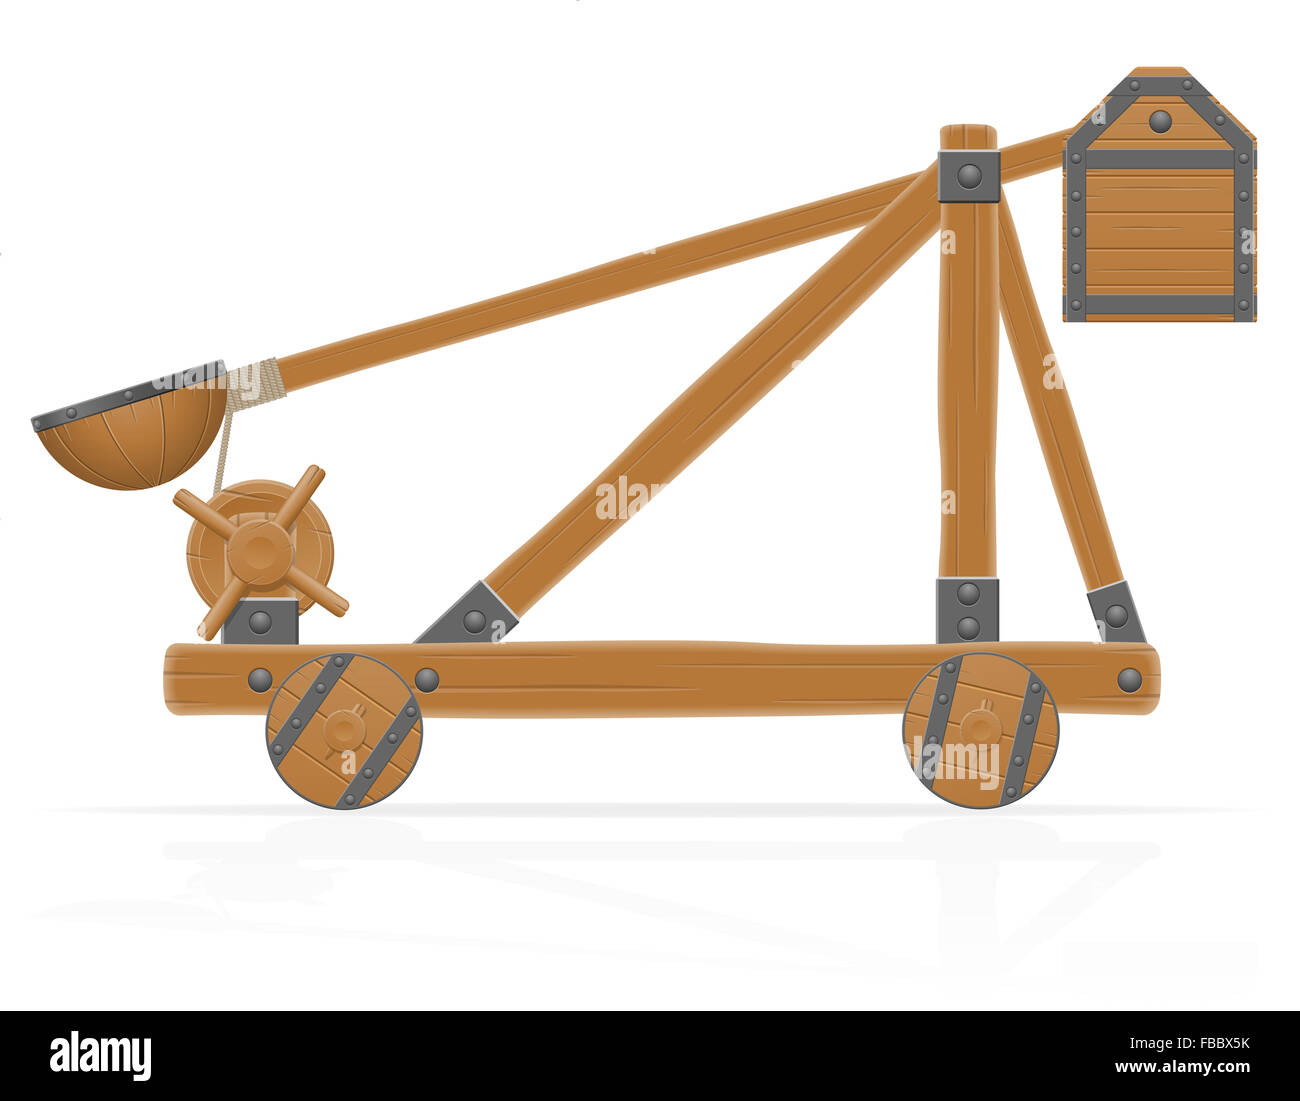 old medieval wooden catapult illustration isolated on white background Stock Photo